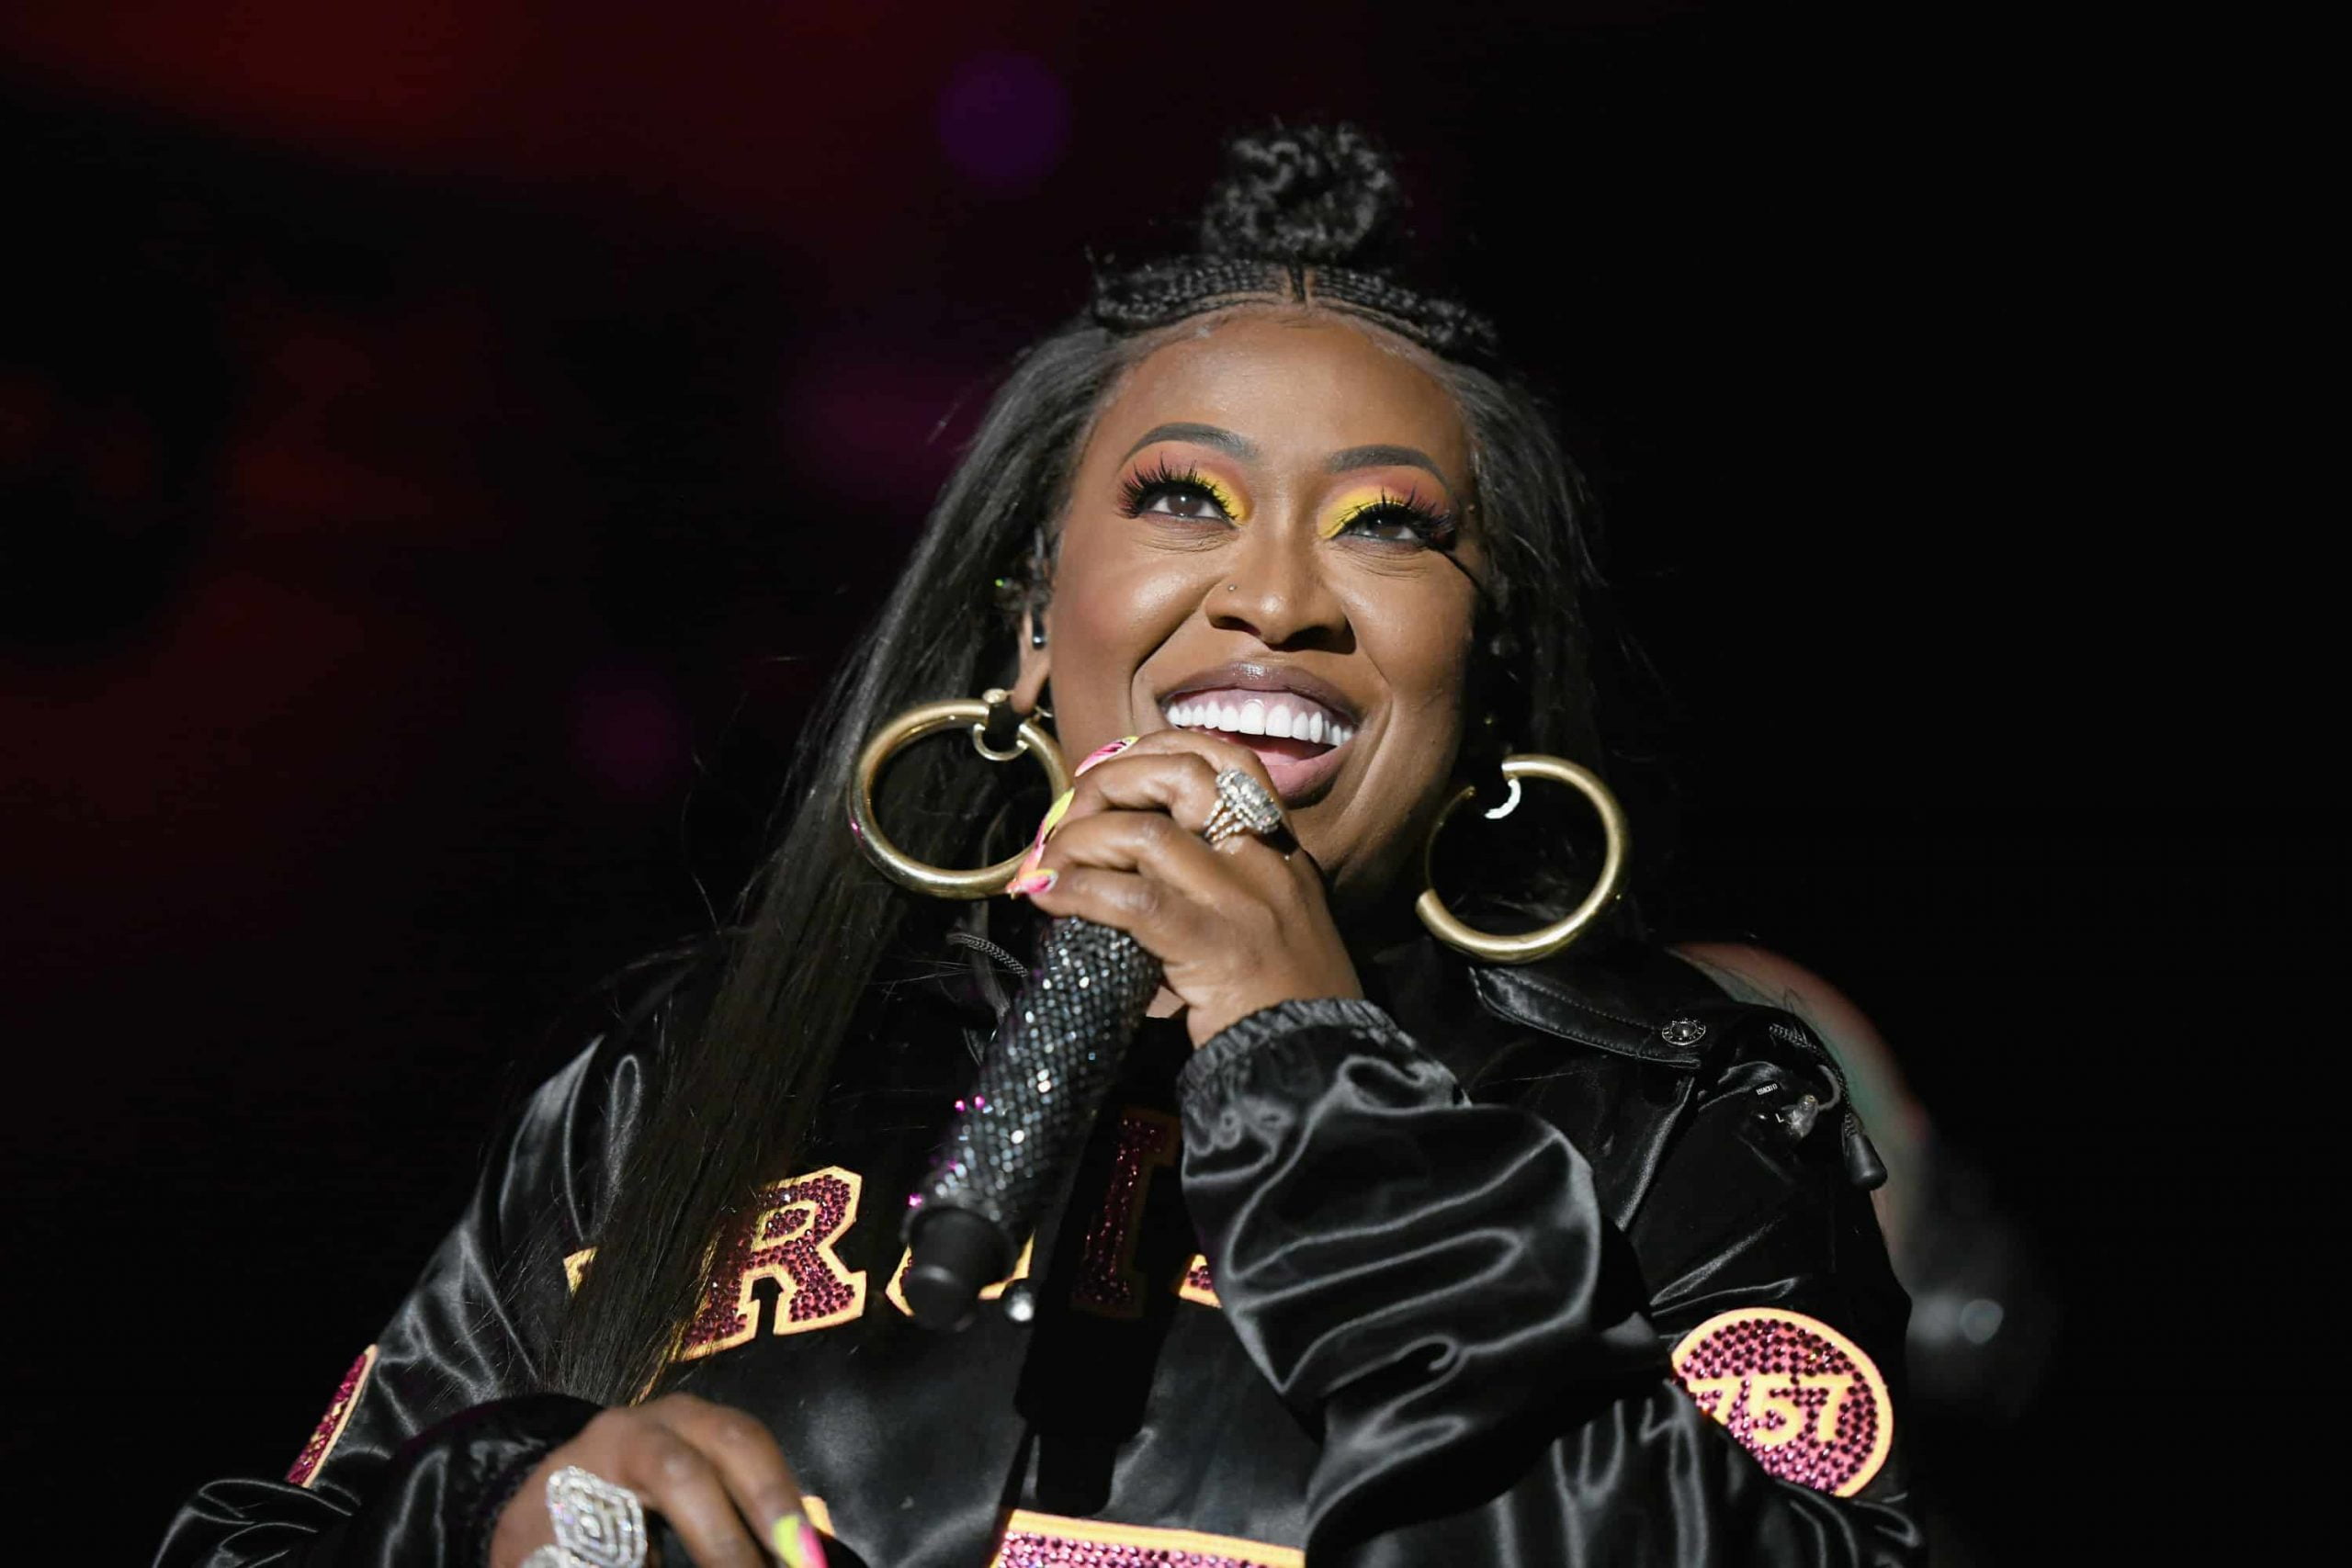 Missy Elliott Confirms That Tweet’s Hit Song “Oops (Oh My)” Has A Totally Different Meaning Than Many Assume